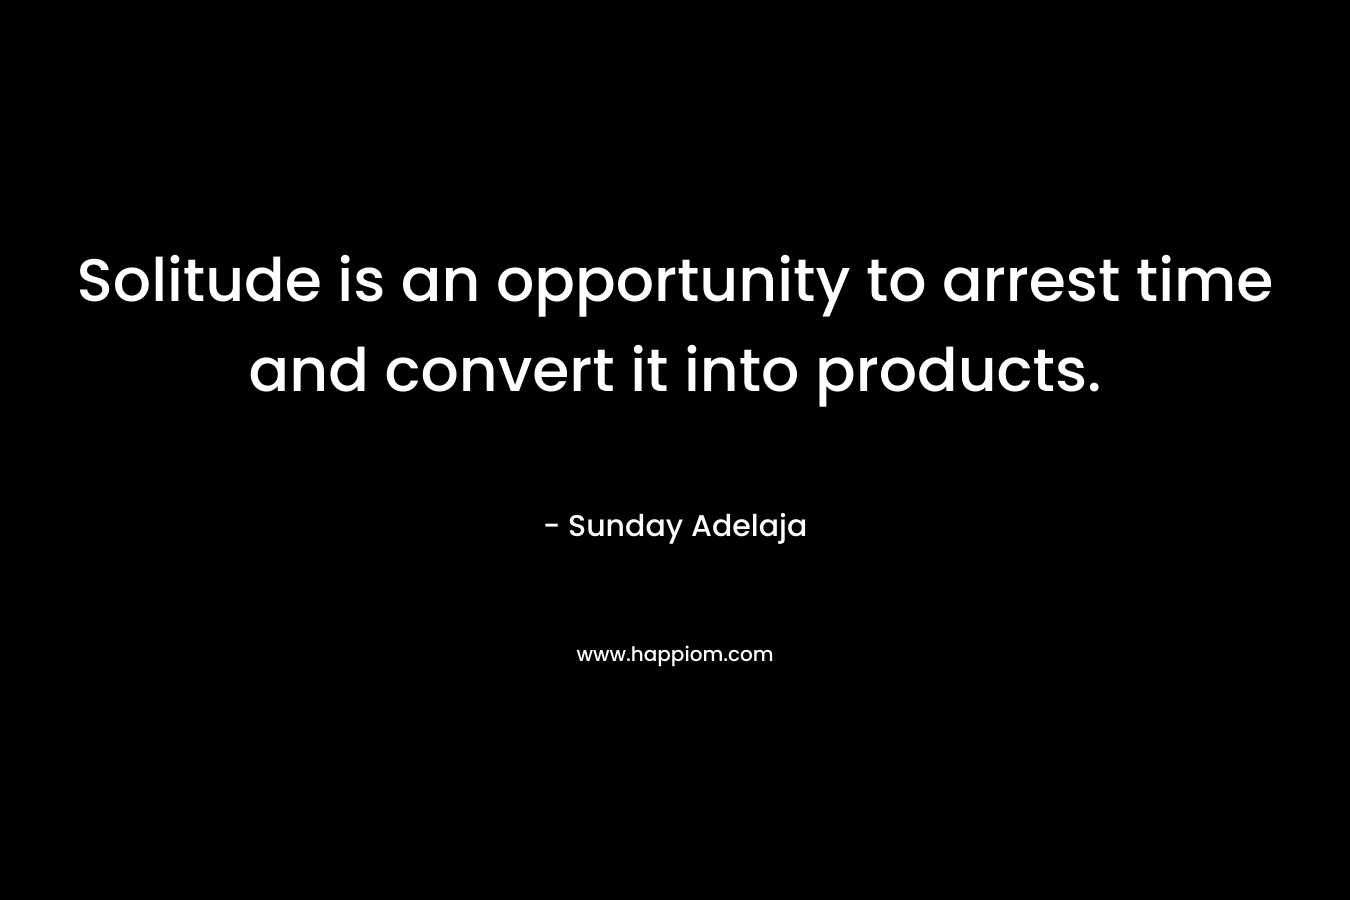 Solitude is an opportunity to arrest time and convert it into products.